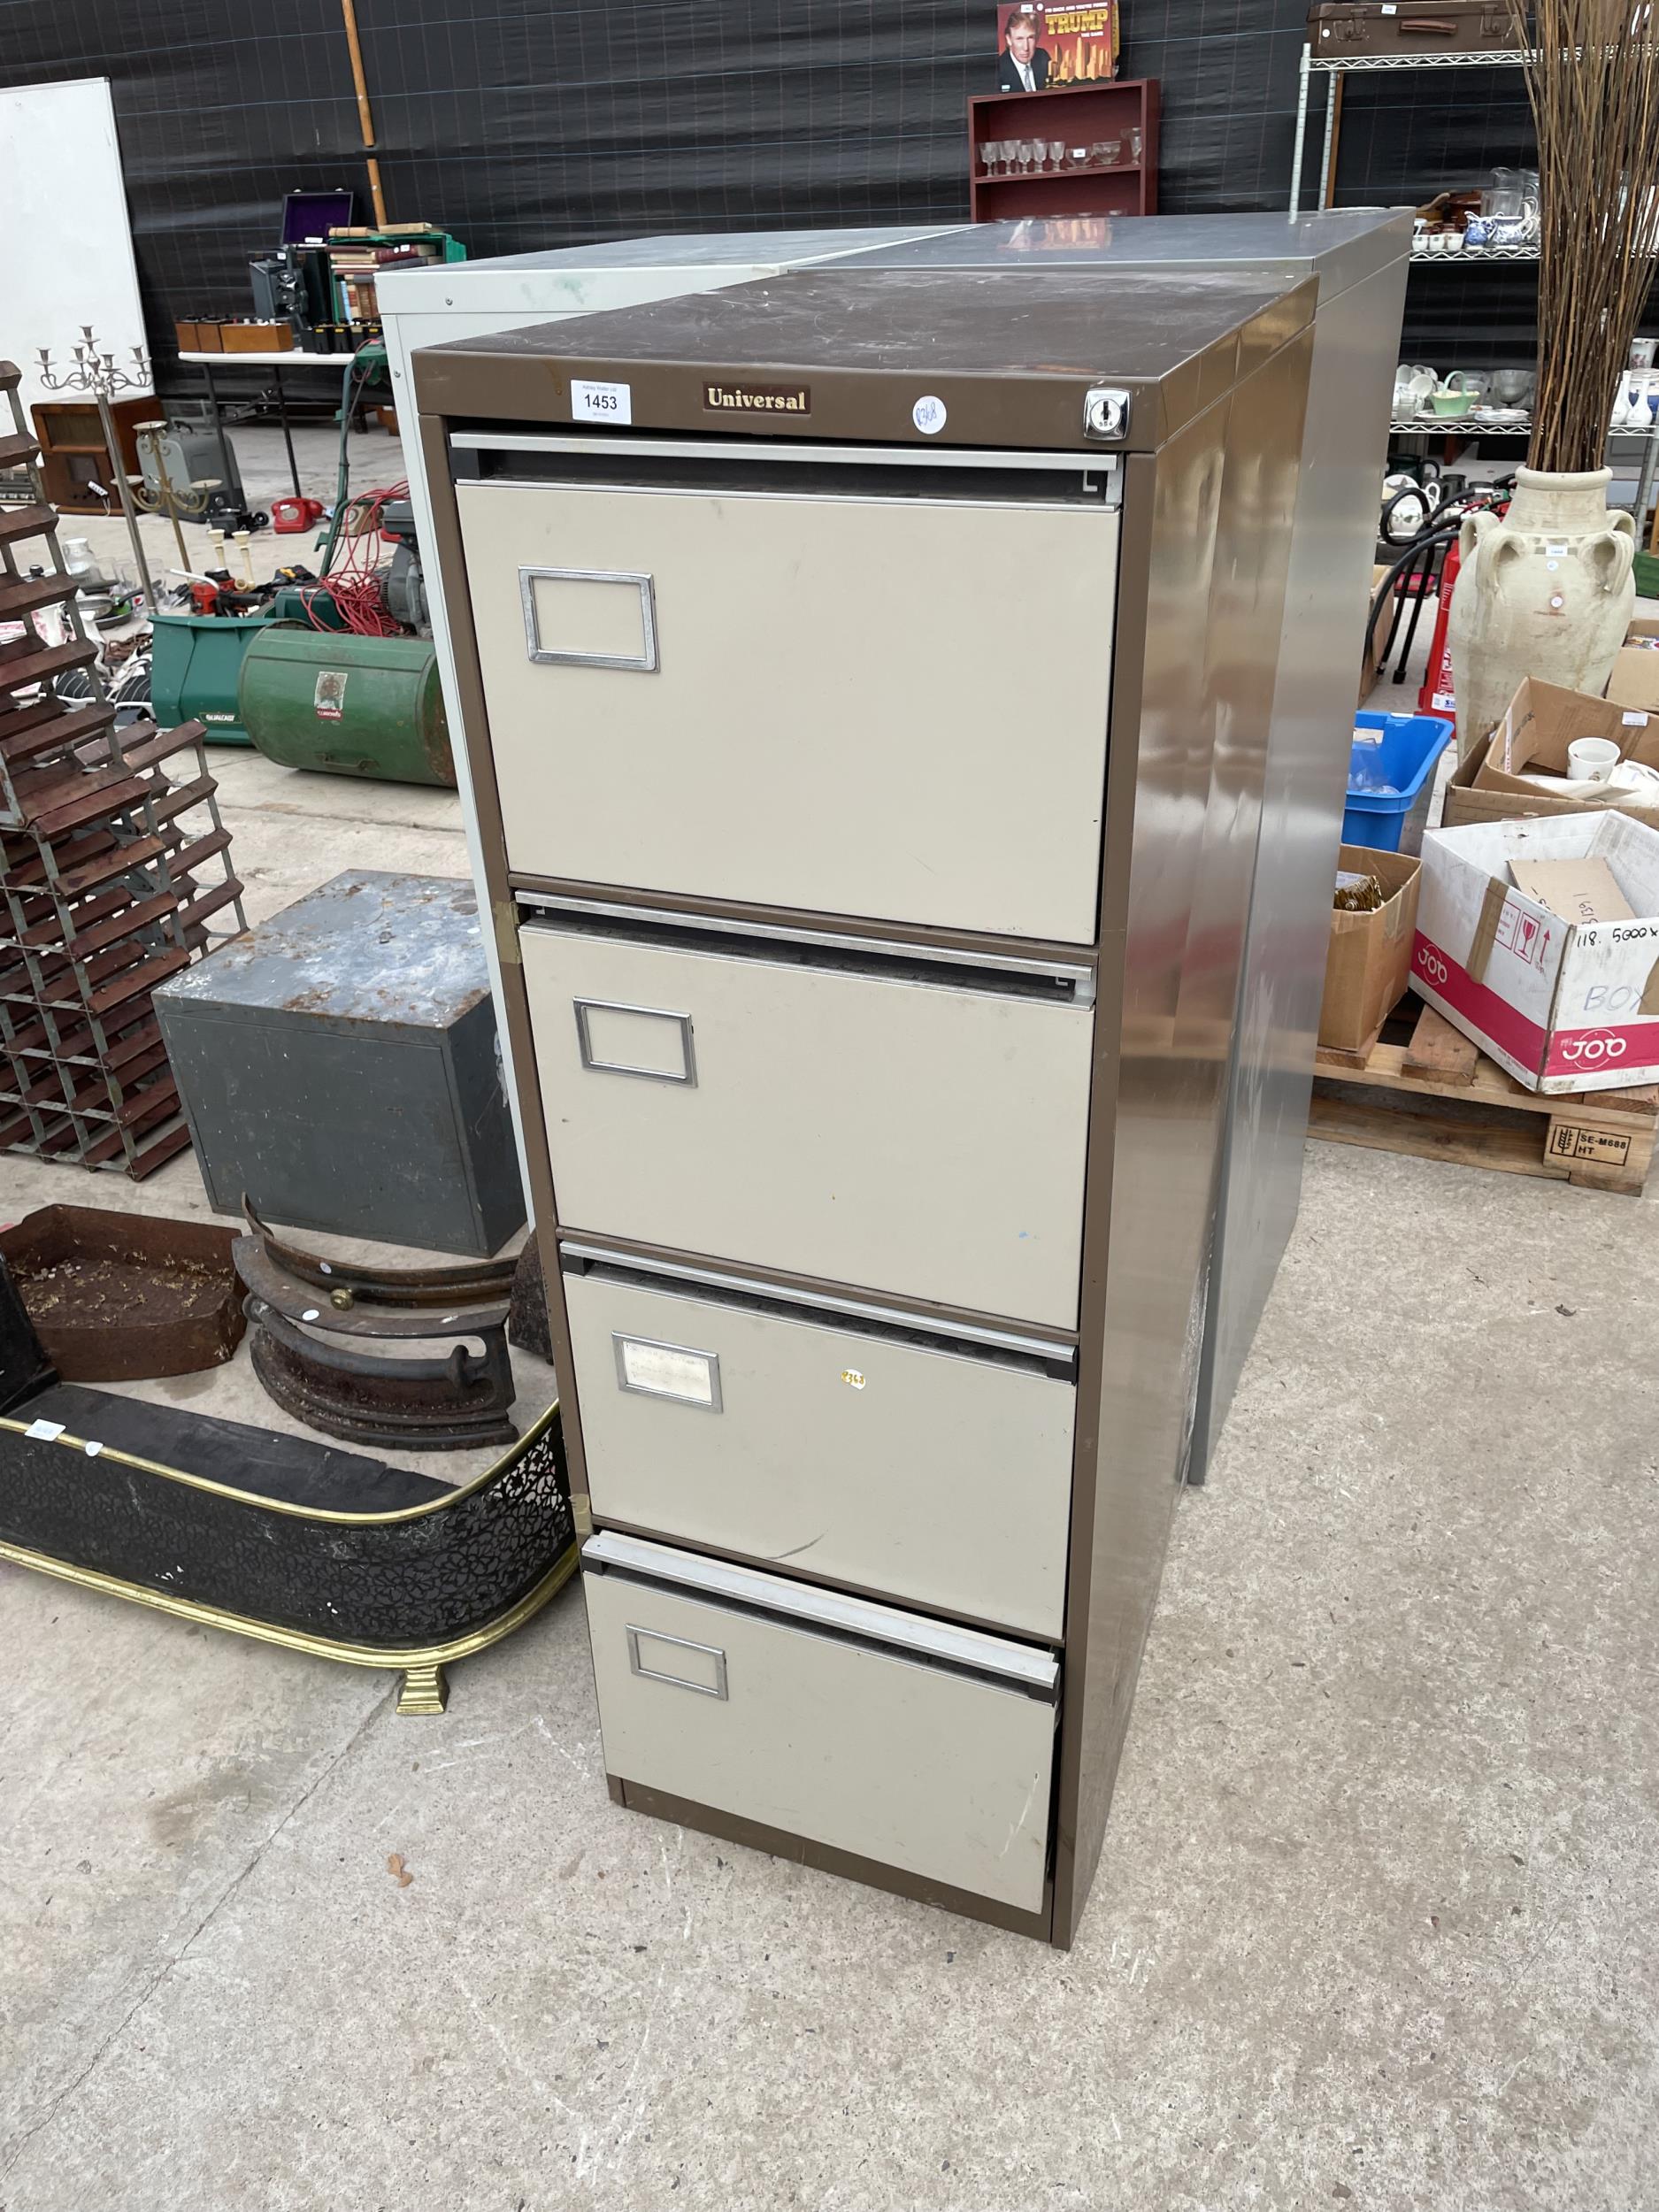 A METAL FOUR DRAWER 'UNIVERSAL' FILING CABINET